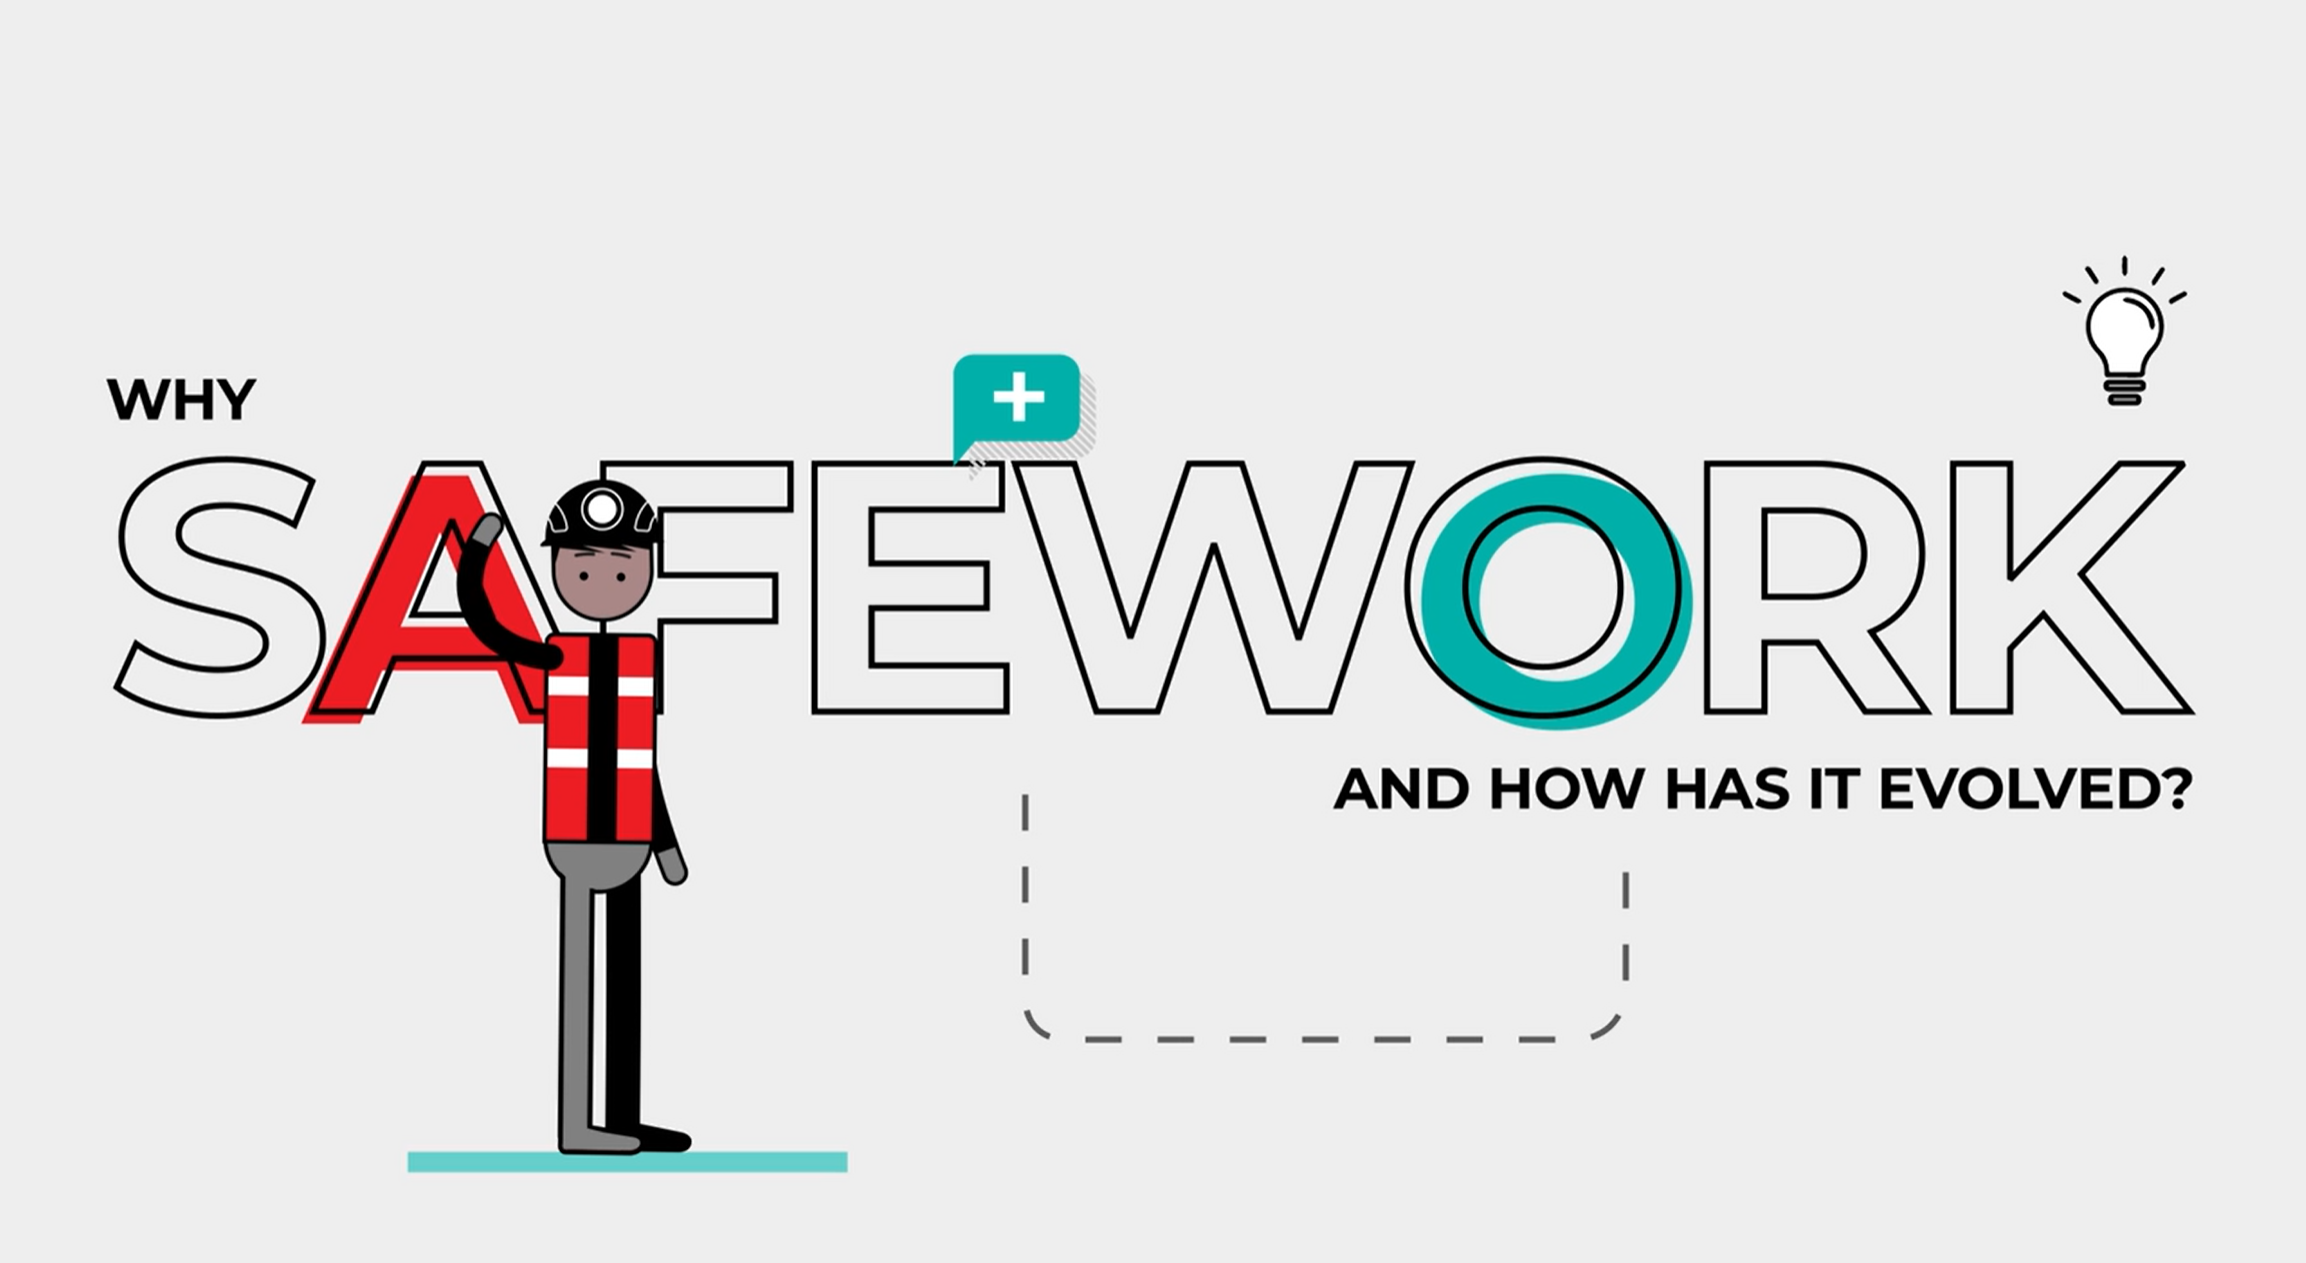 Why SafeWork and how has it evolved, watch the animation